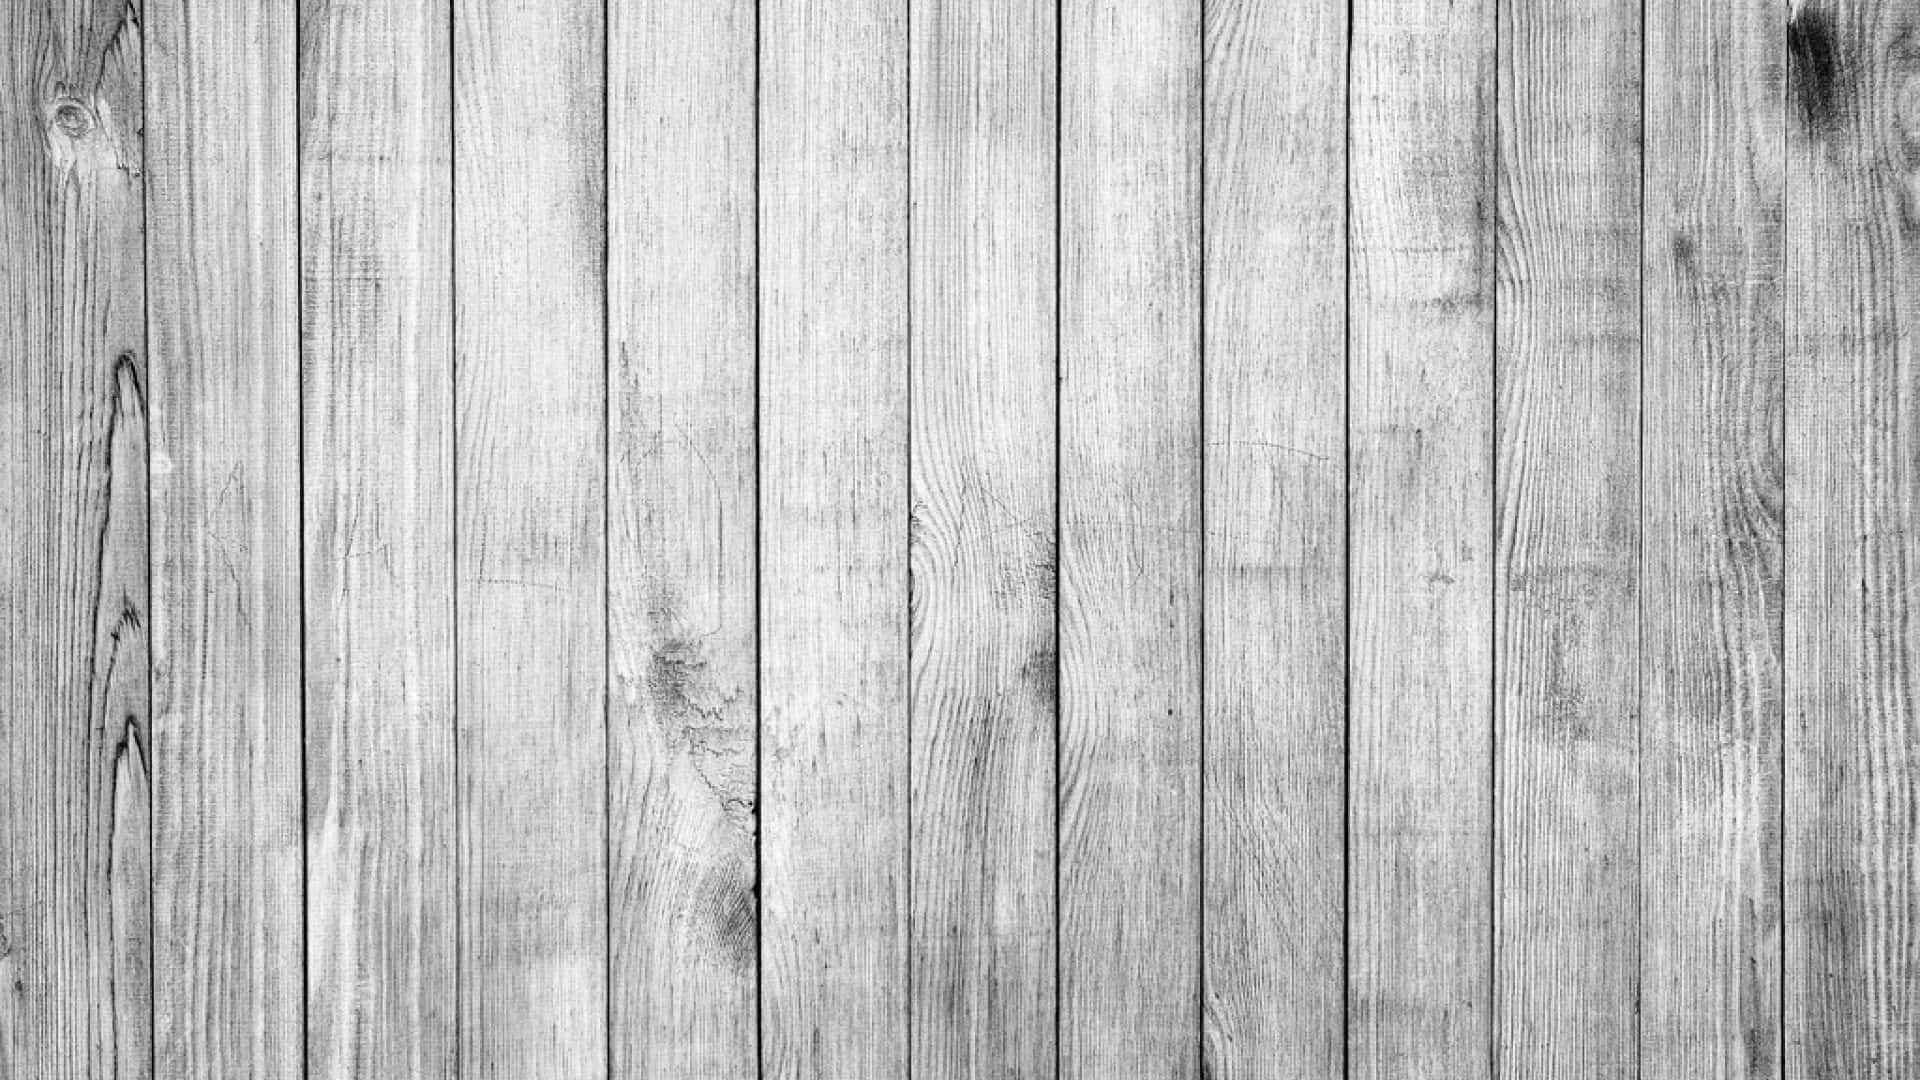 Rustic Wood Background with Character